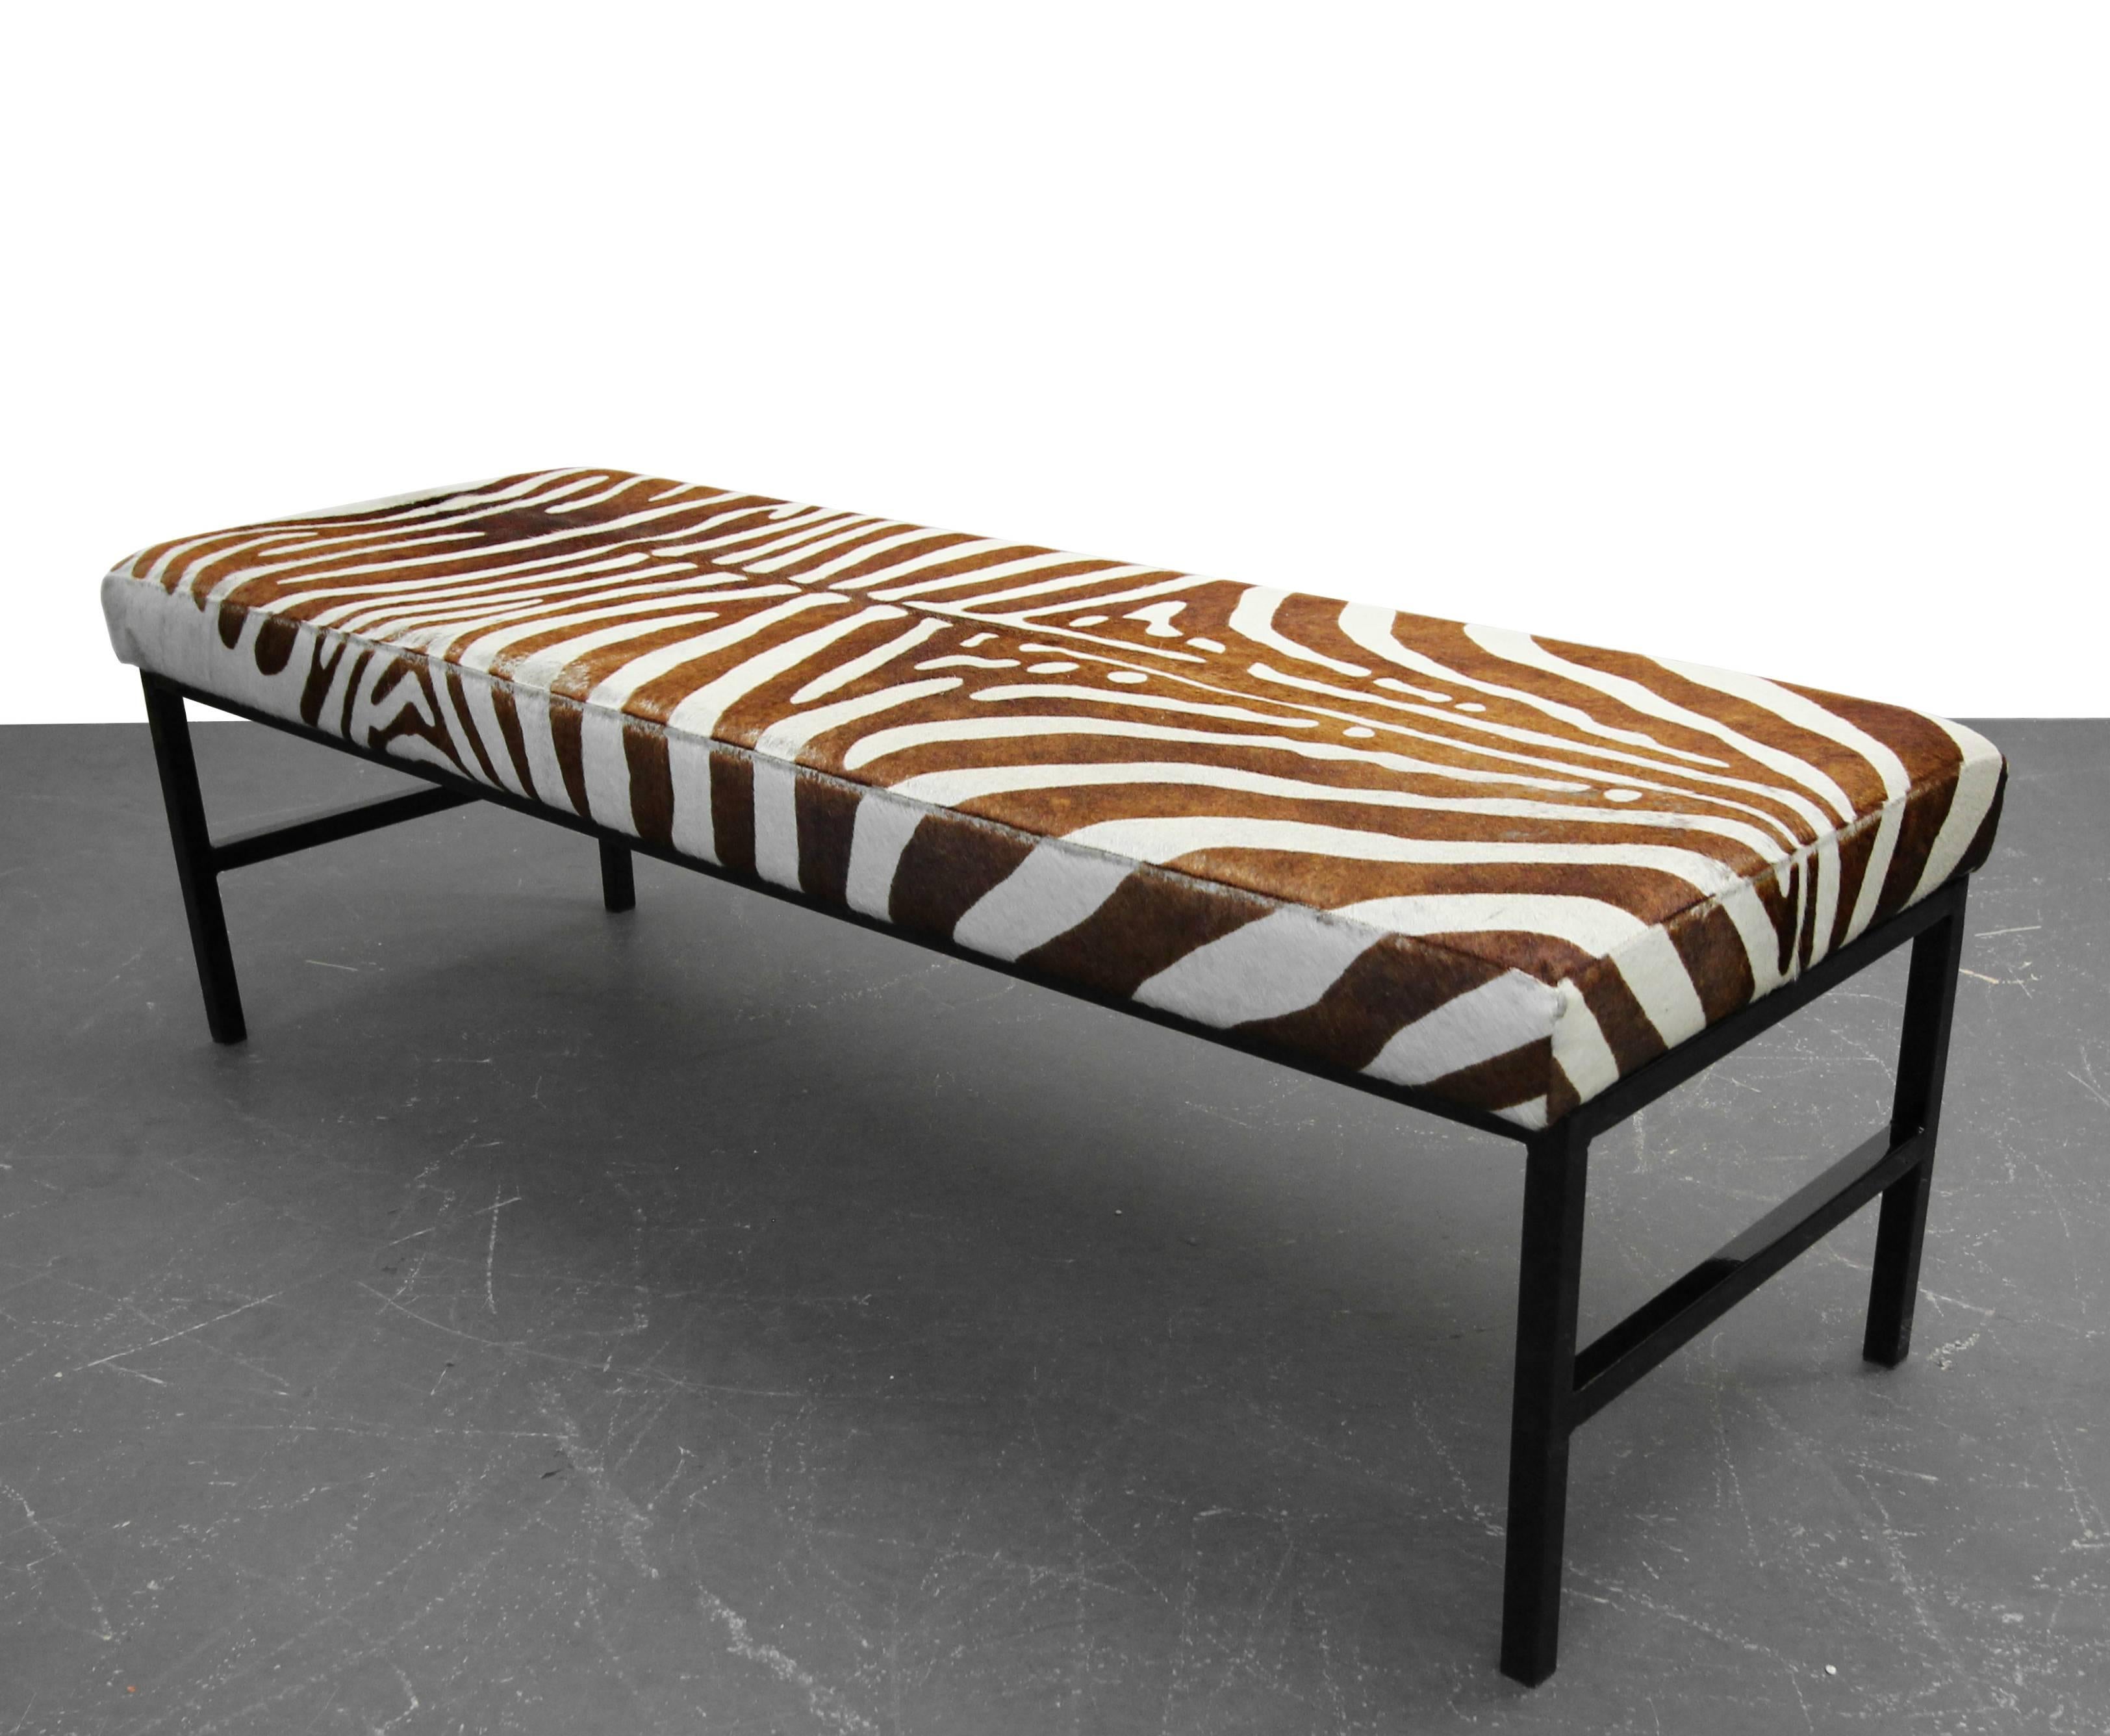 Upholstered in an authentic and rare brown zebra hide and resting upon a high gloss, powder coated base, this bench is a Minimalist punch of modern style. Looking for that one amazing detail piece to complete y our room, here it is.

Overall